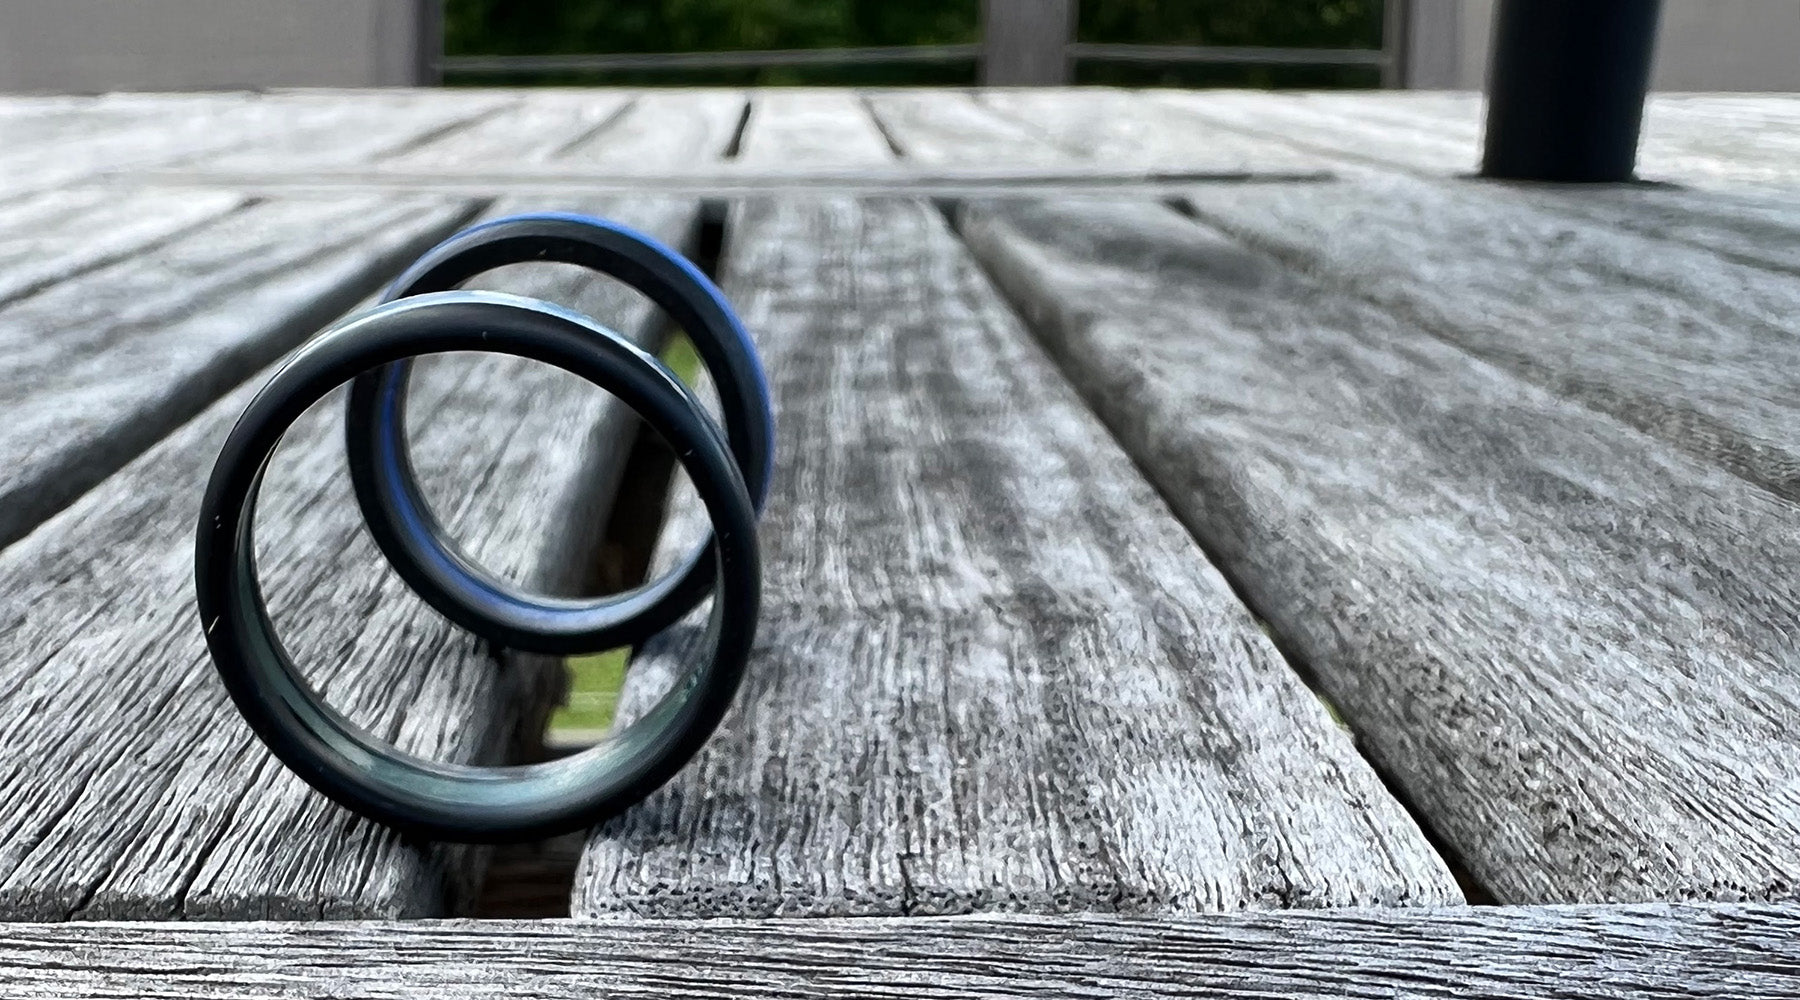 What They Don't Tell You About Silicone Rings: Simpler is Stronger